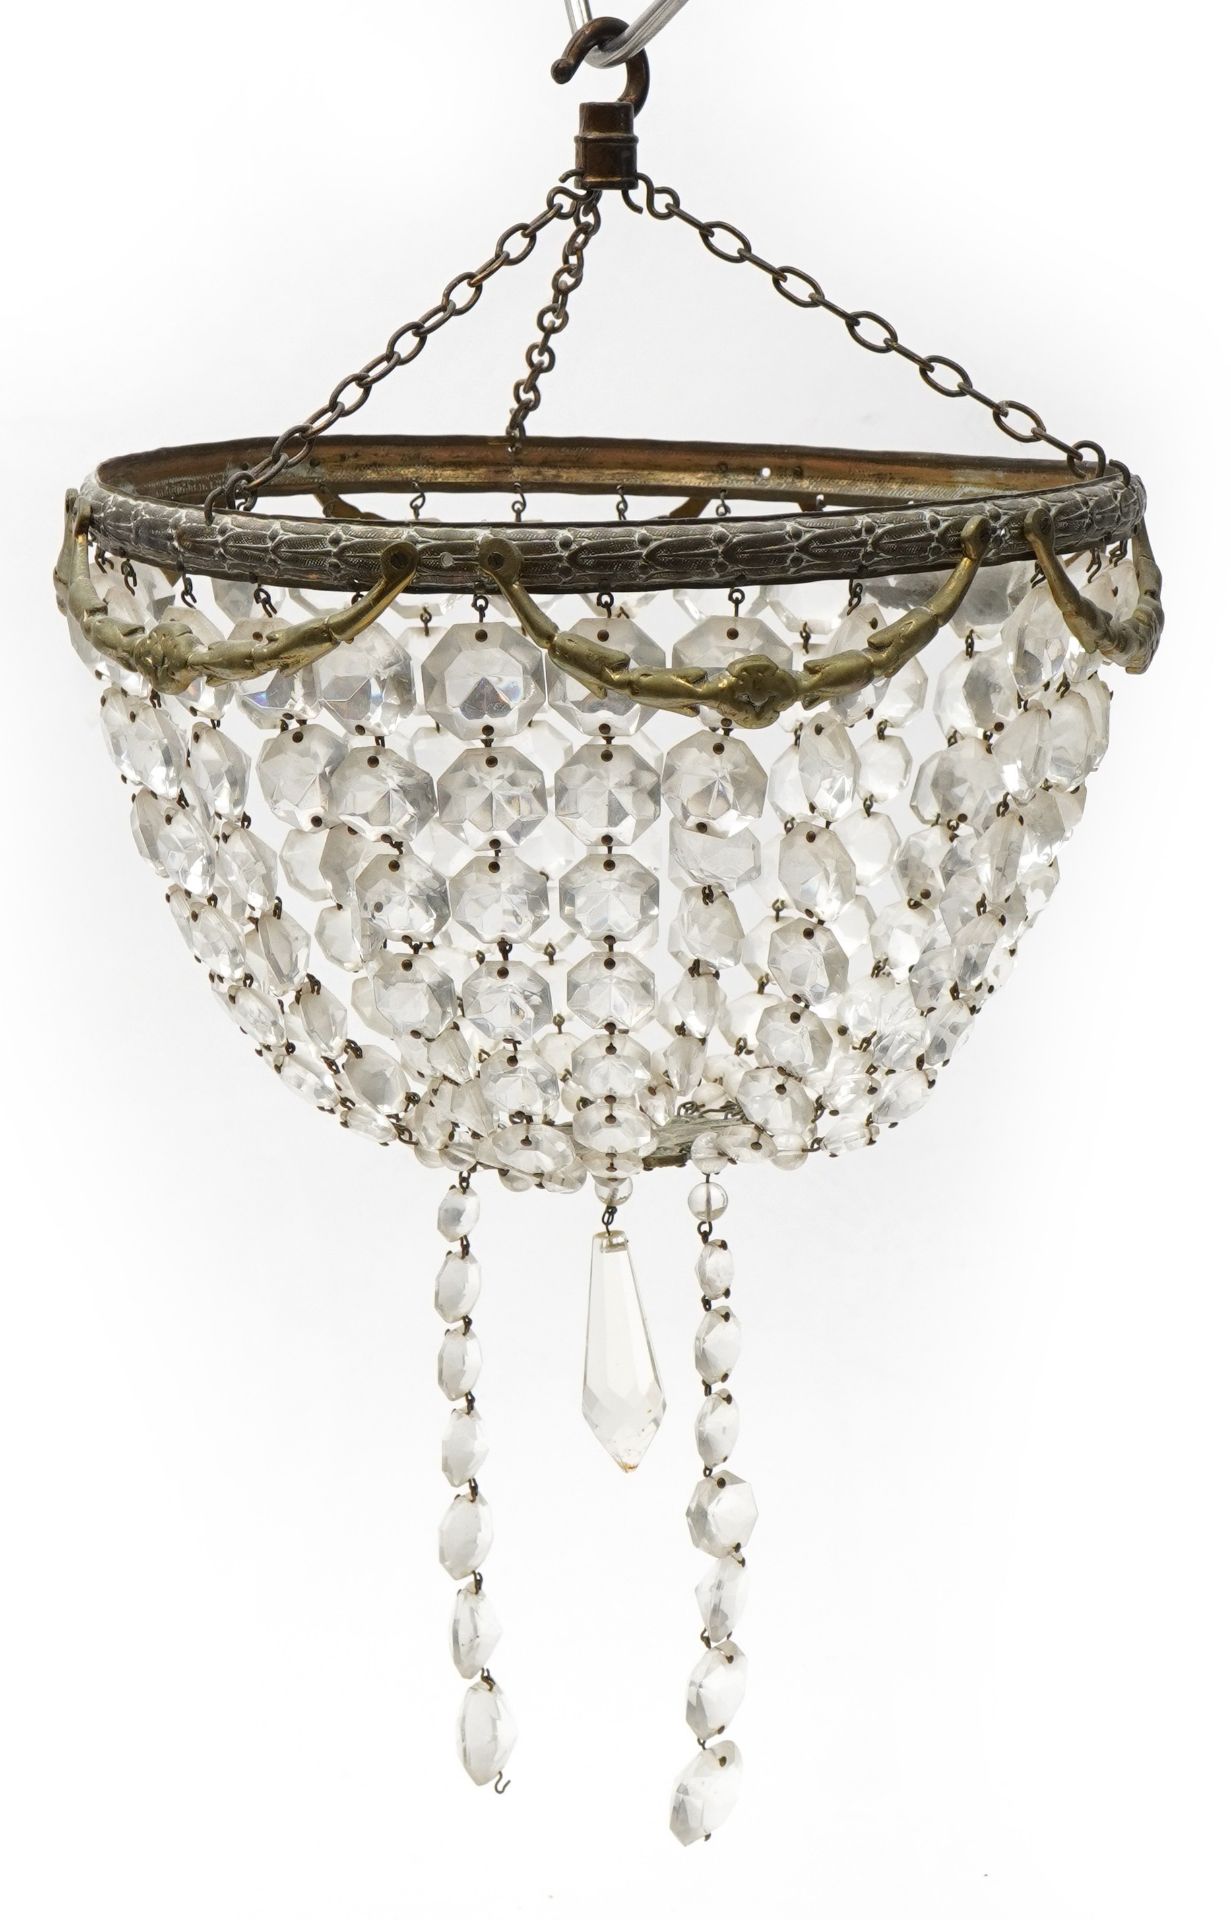 Two brass bag chandeliers with cut glass drops, the largest 26cm in diameter : For further - Image 2 of 6